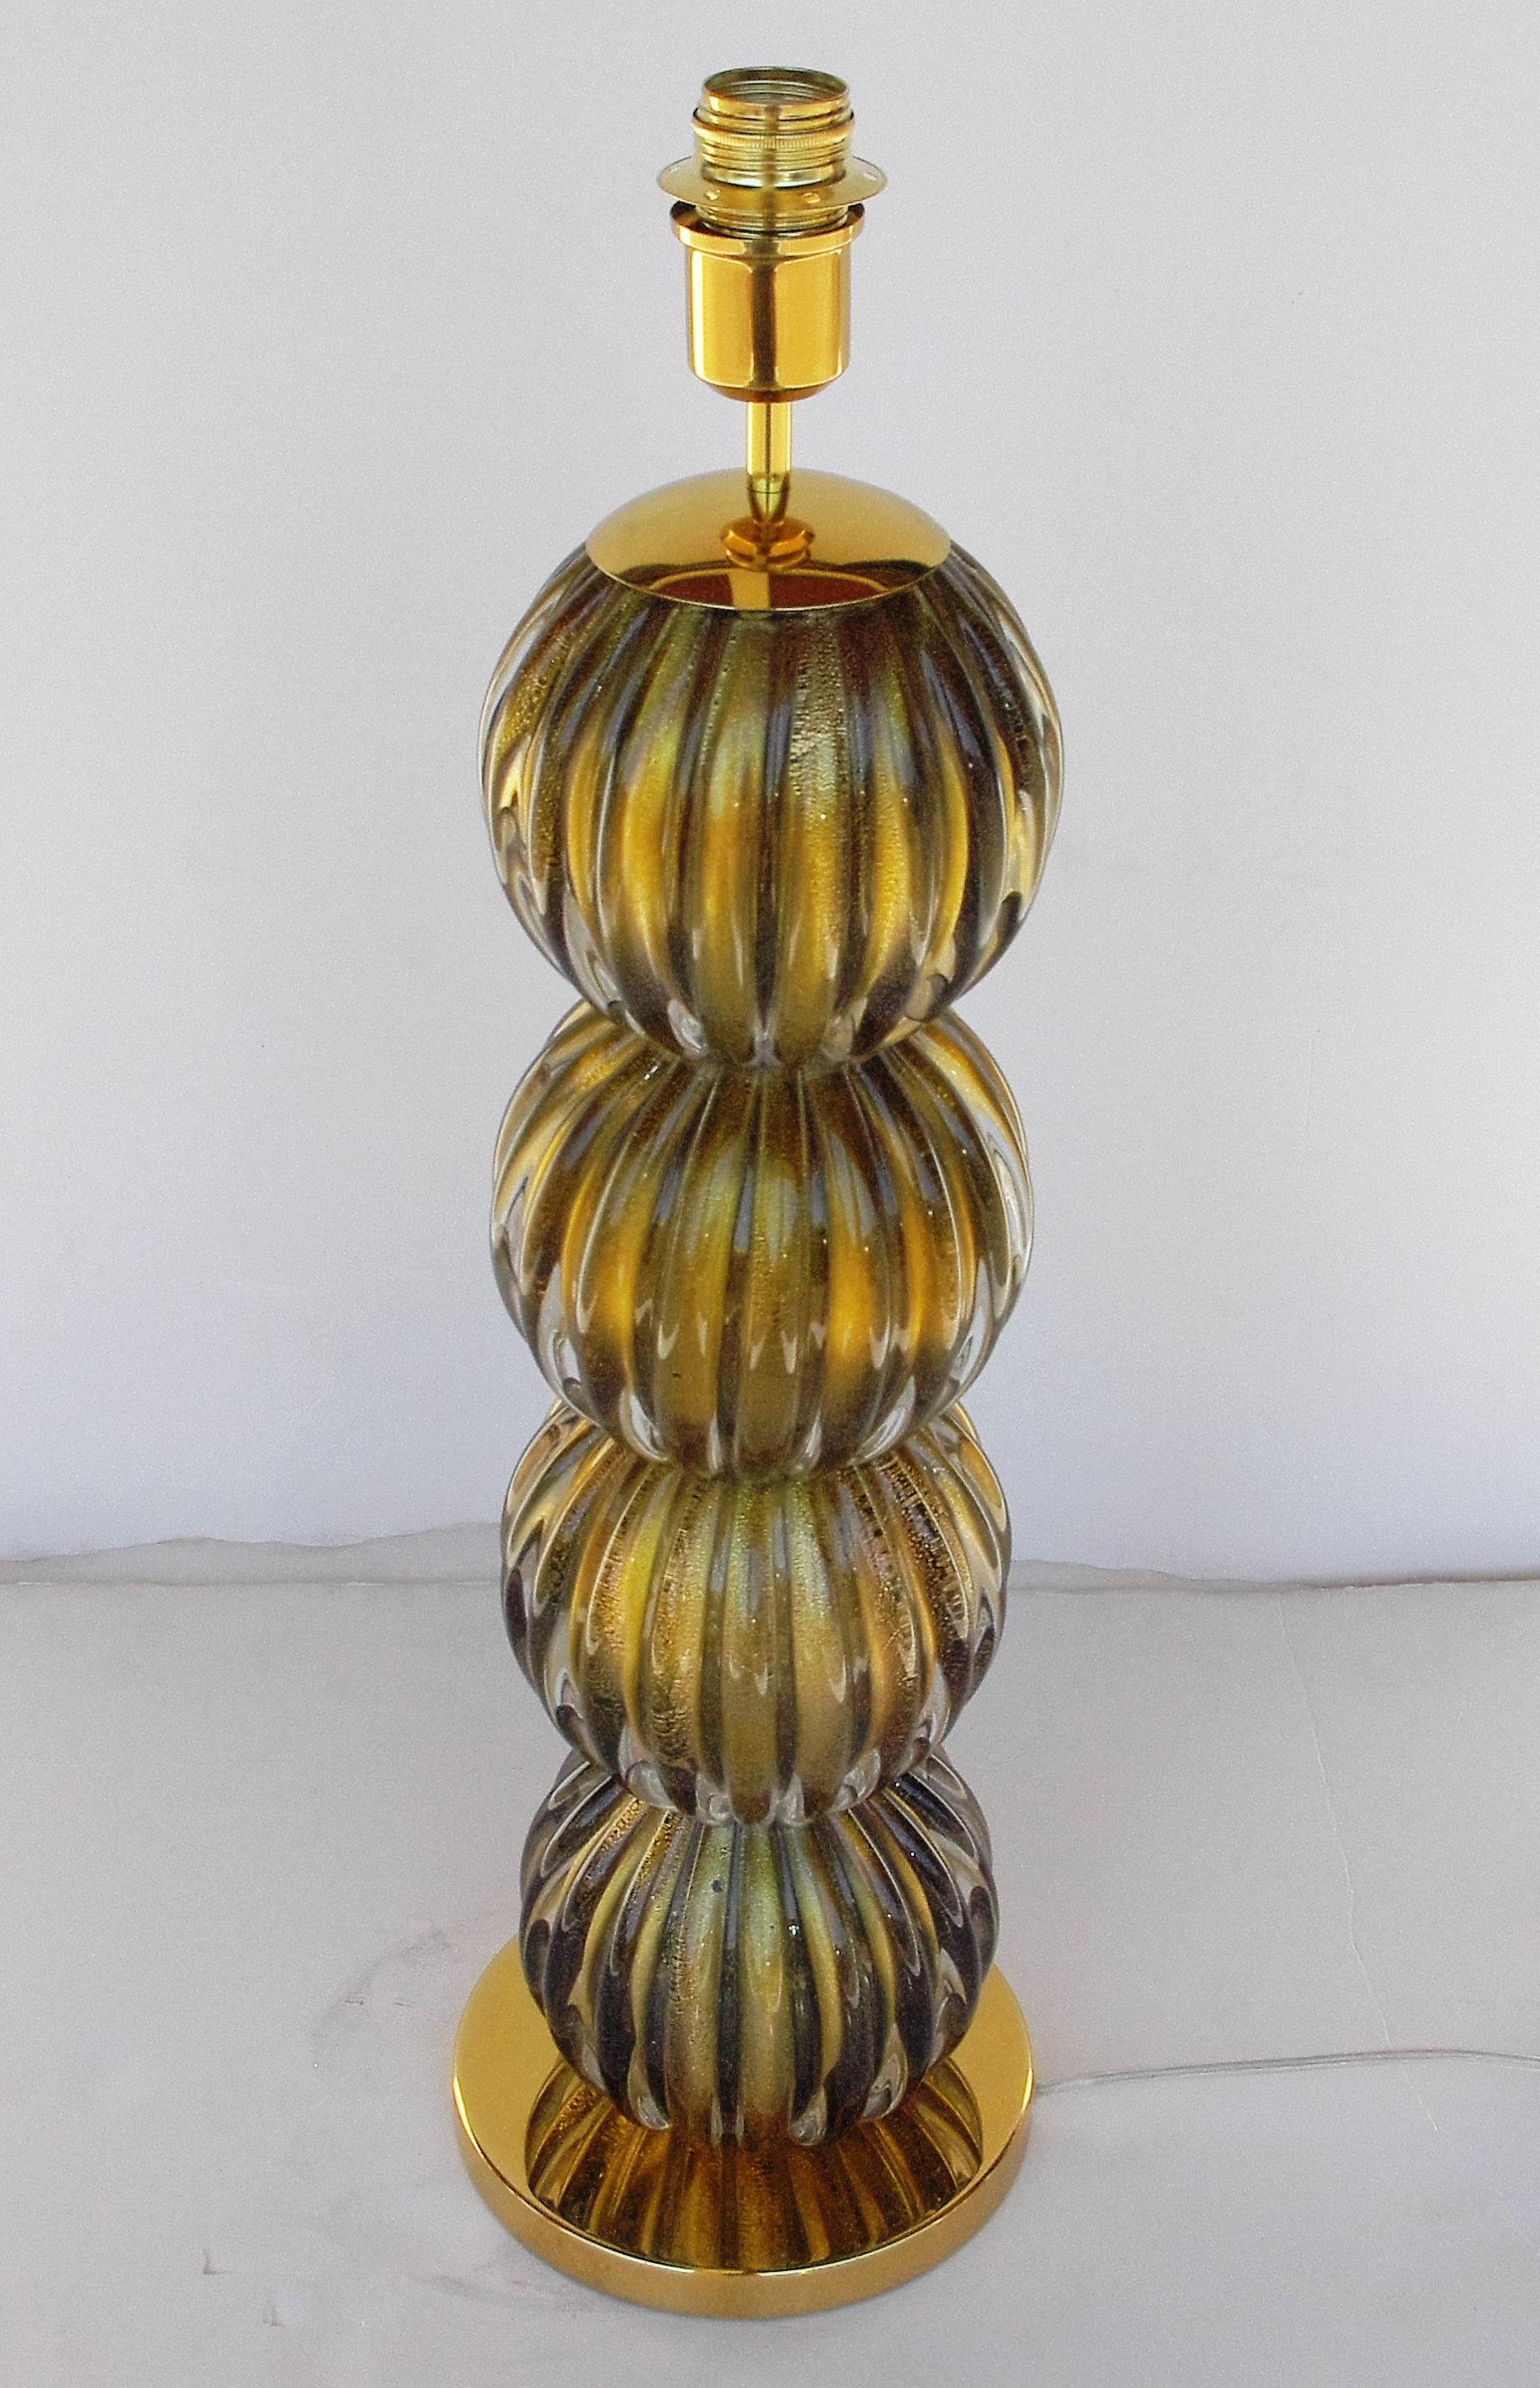 Italian table lamp with hand blown Murano glass infused with gold flecks and brass details / Designed by Fabio Bergomi for Fabio Ltd / Made in Italy
1 light / E26 or E27 type / max 60W 
Height: 28 inches / Diameter: 7.5 inches 
Order Only / This